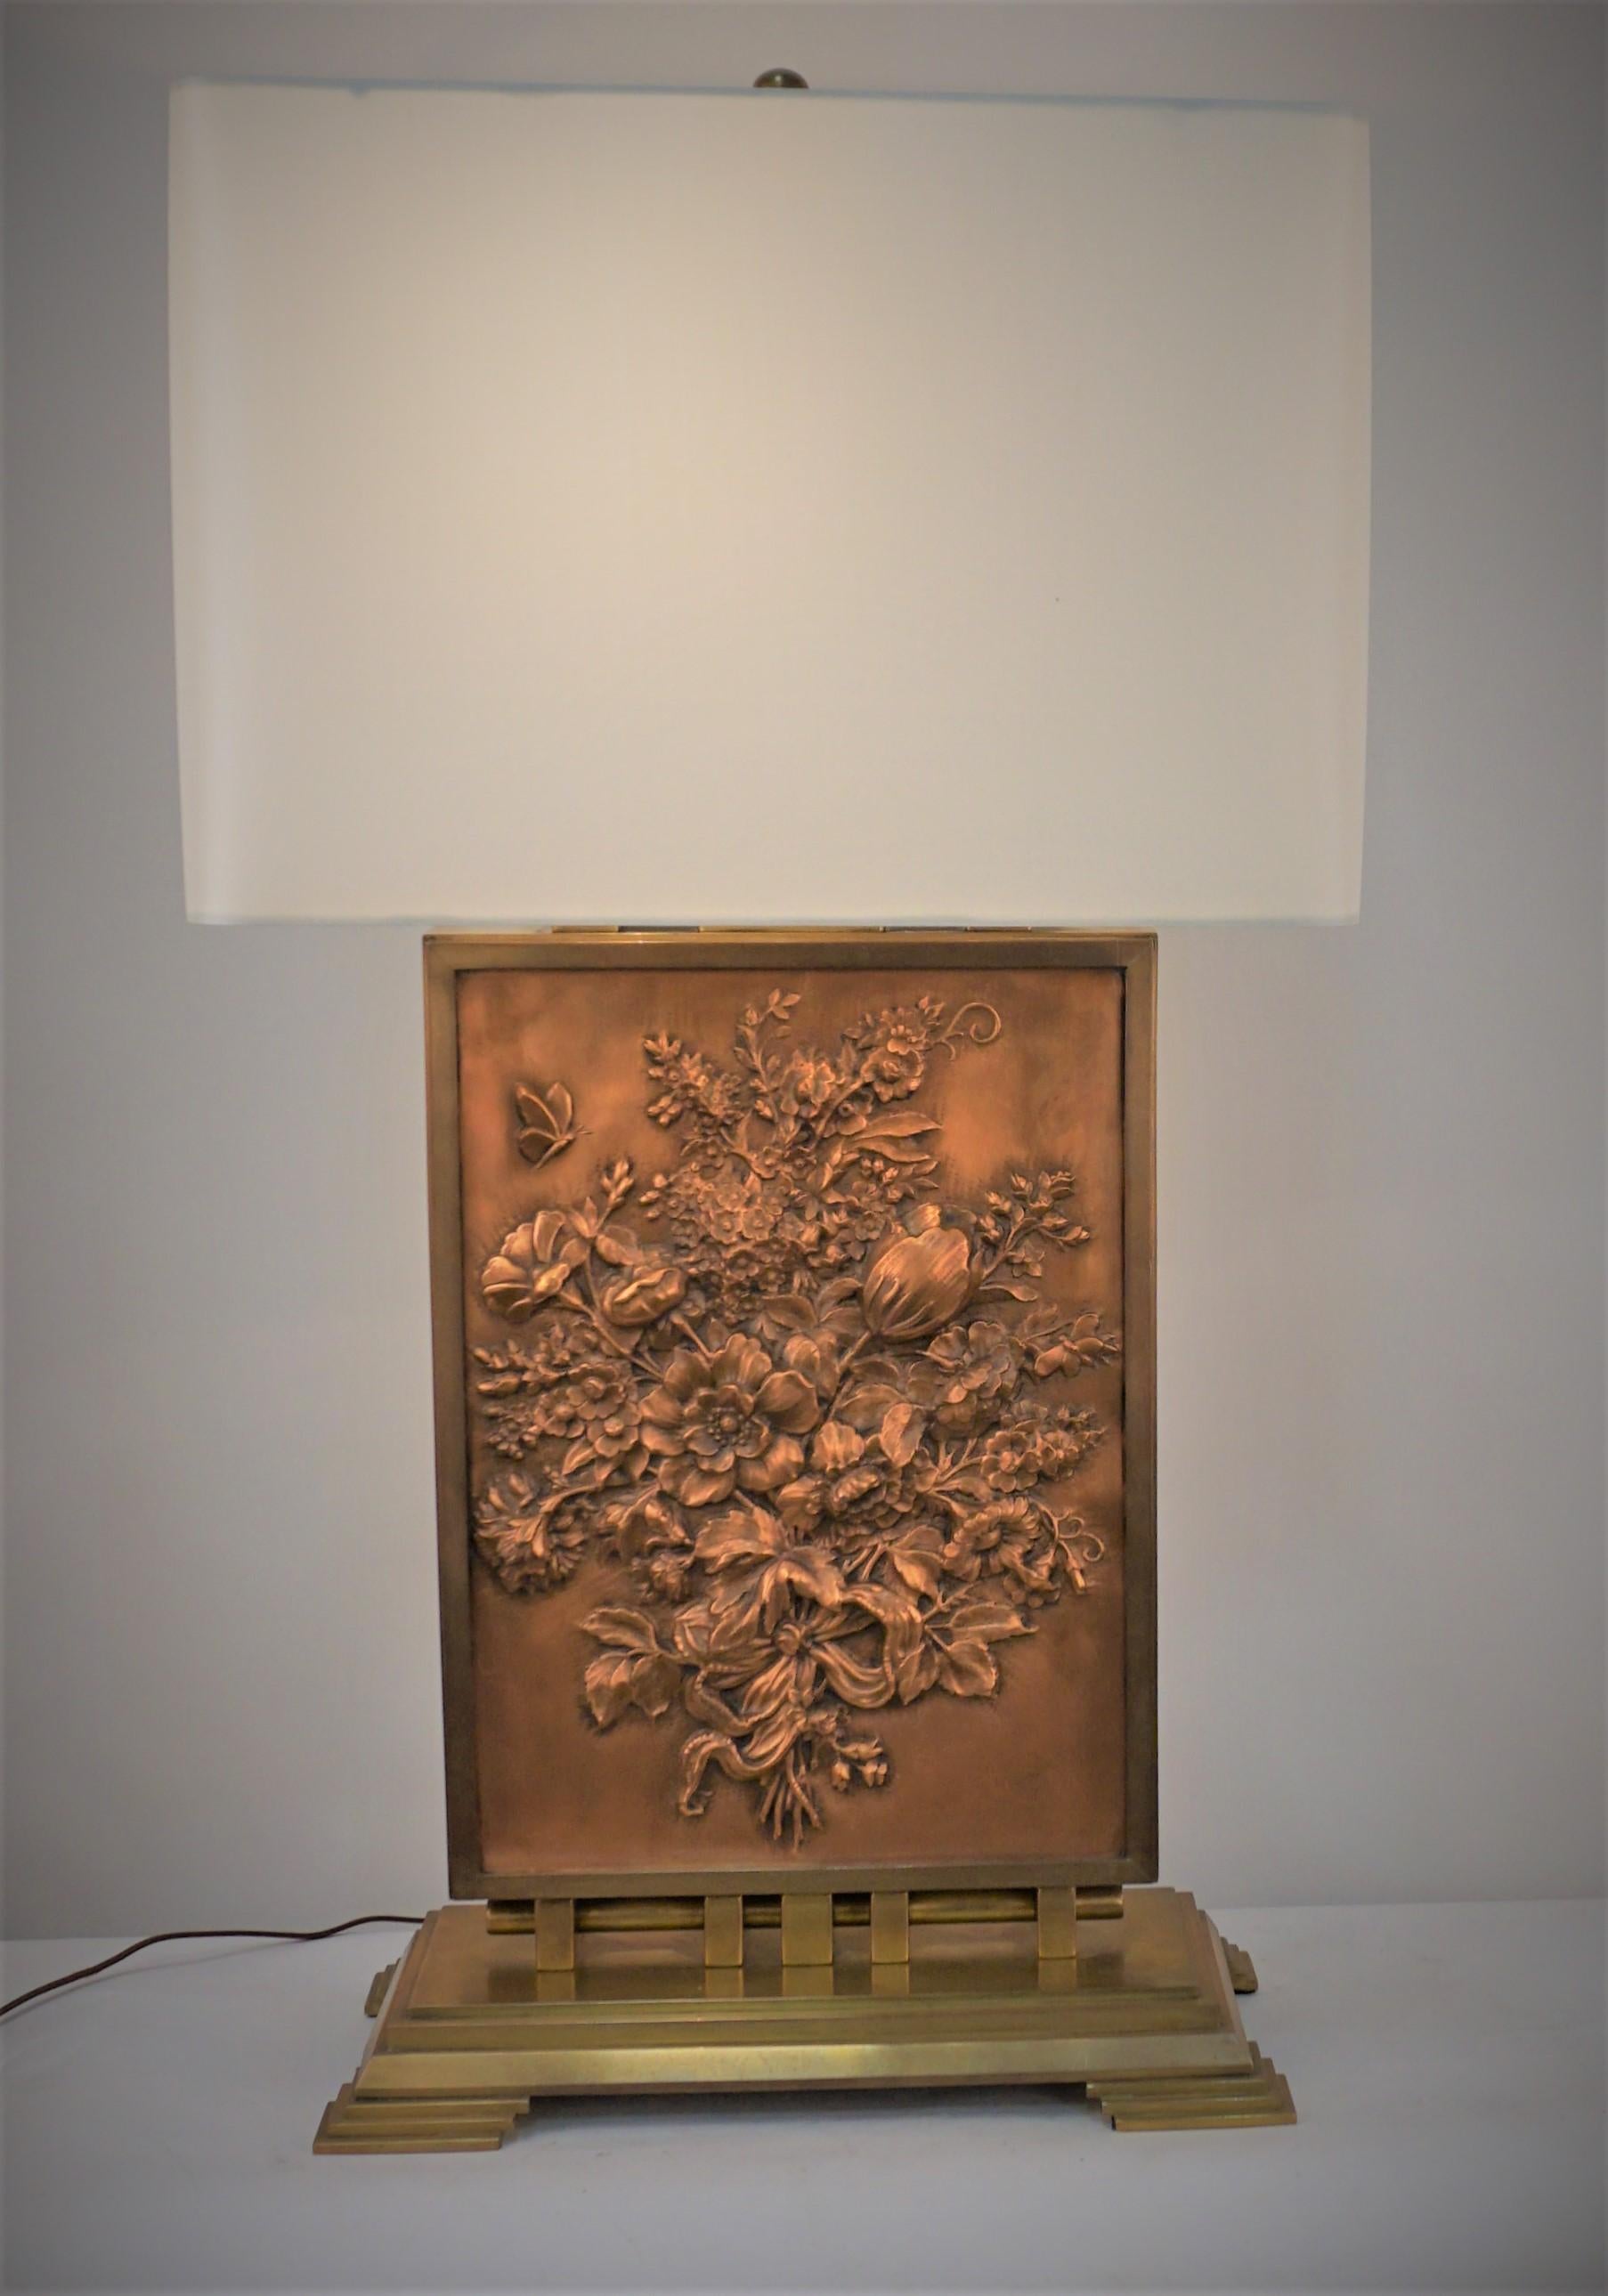 Beautiful Copper Repoussé framed in heavy bronze table lamp by Albert Gilles
Majority of his copper repousse lamps are light copper and framed in wood for commercial purpose, but this lamp has heavy Gauge copper and framed in heavy cased bronze itis